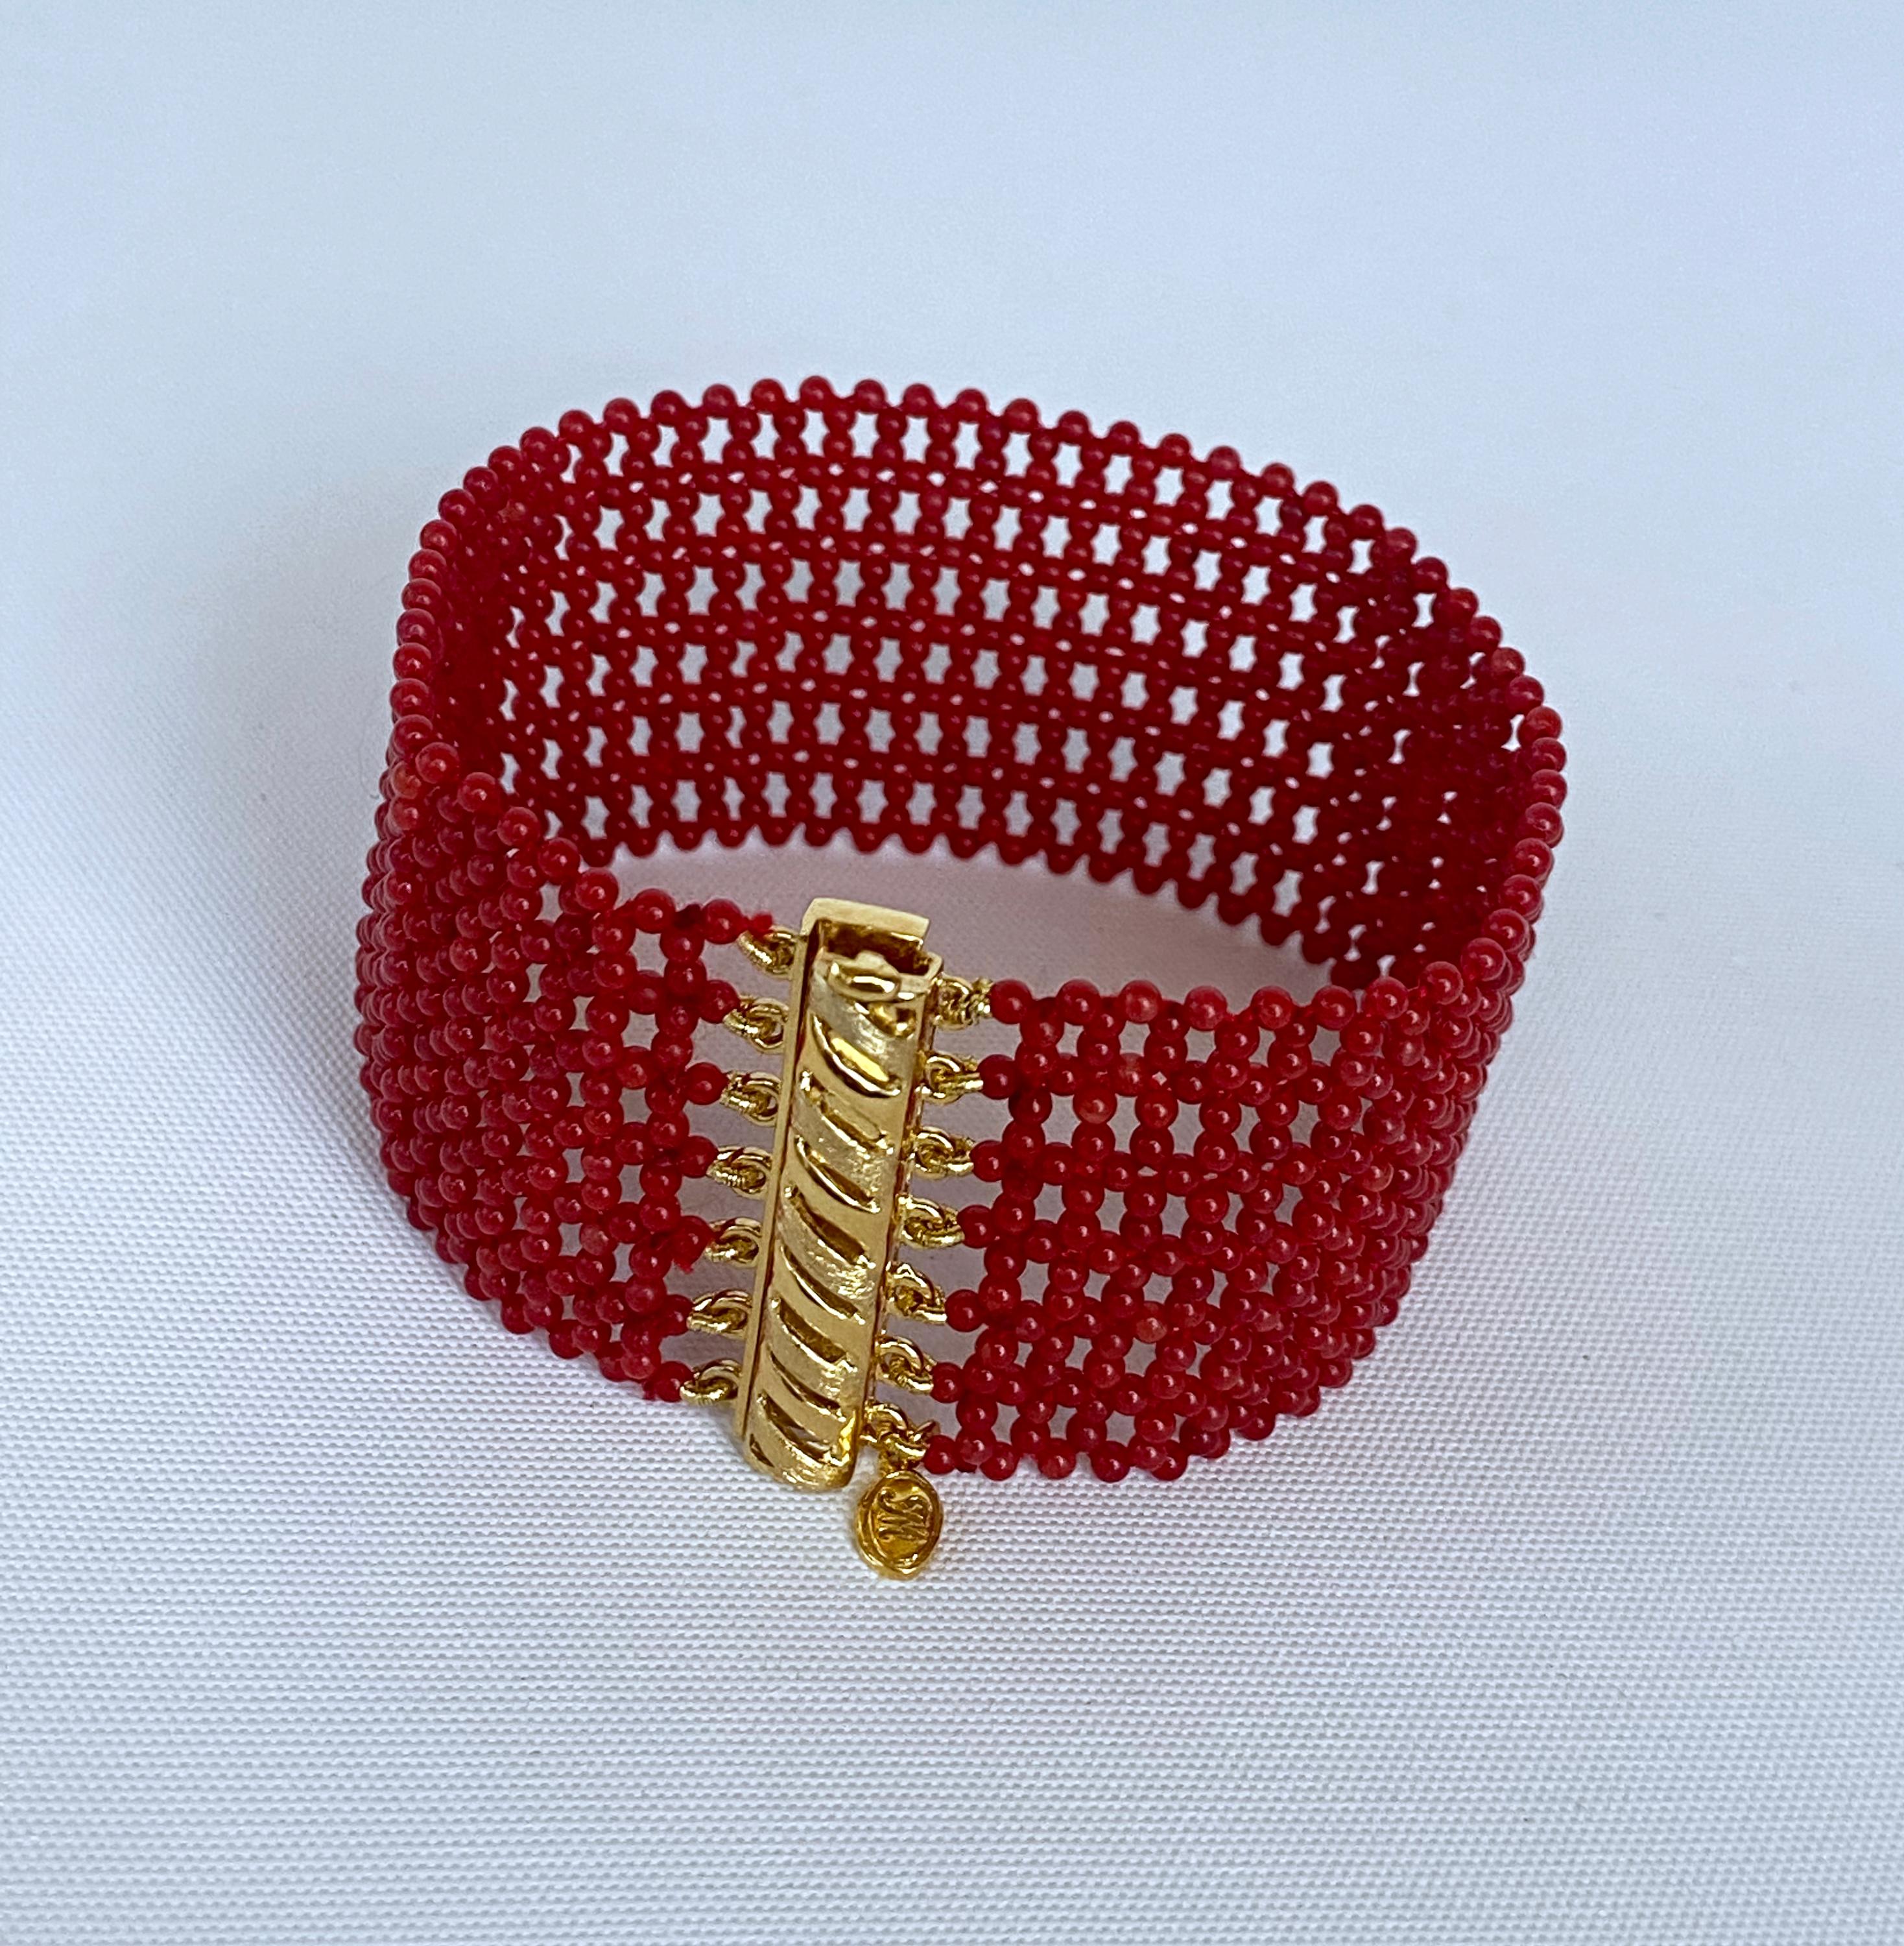 Marina J. Coral Woven Bracelet with 14k Yellow Gold Plated Sterling Silver Clasp For Sale 1